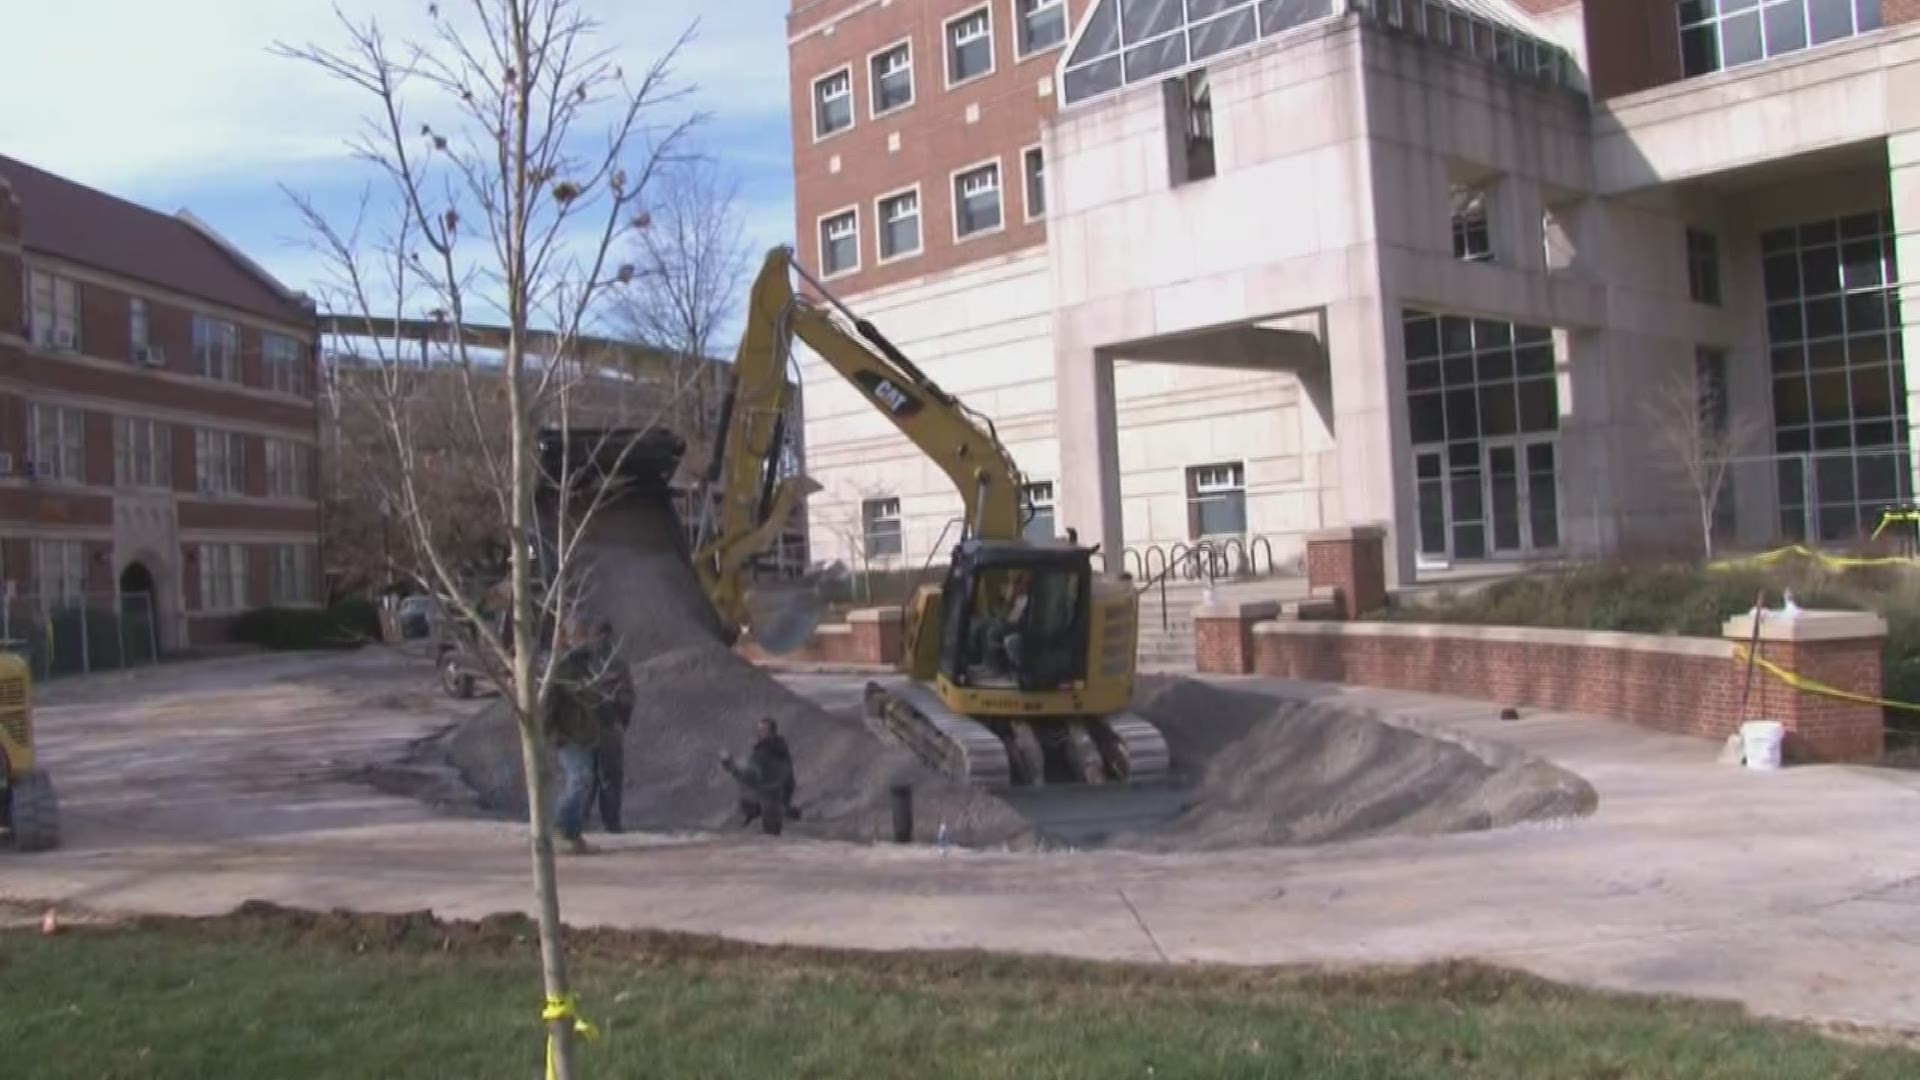 UT said the sinkhole formed after a water main break. Crews are temporarily patching it until they can make permanent repairs over the summer.